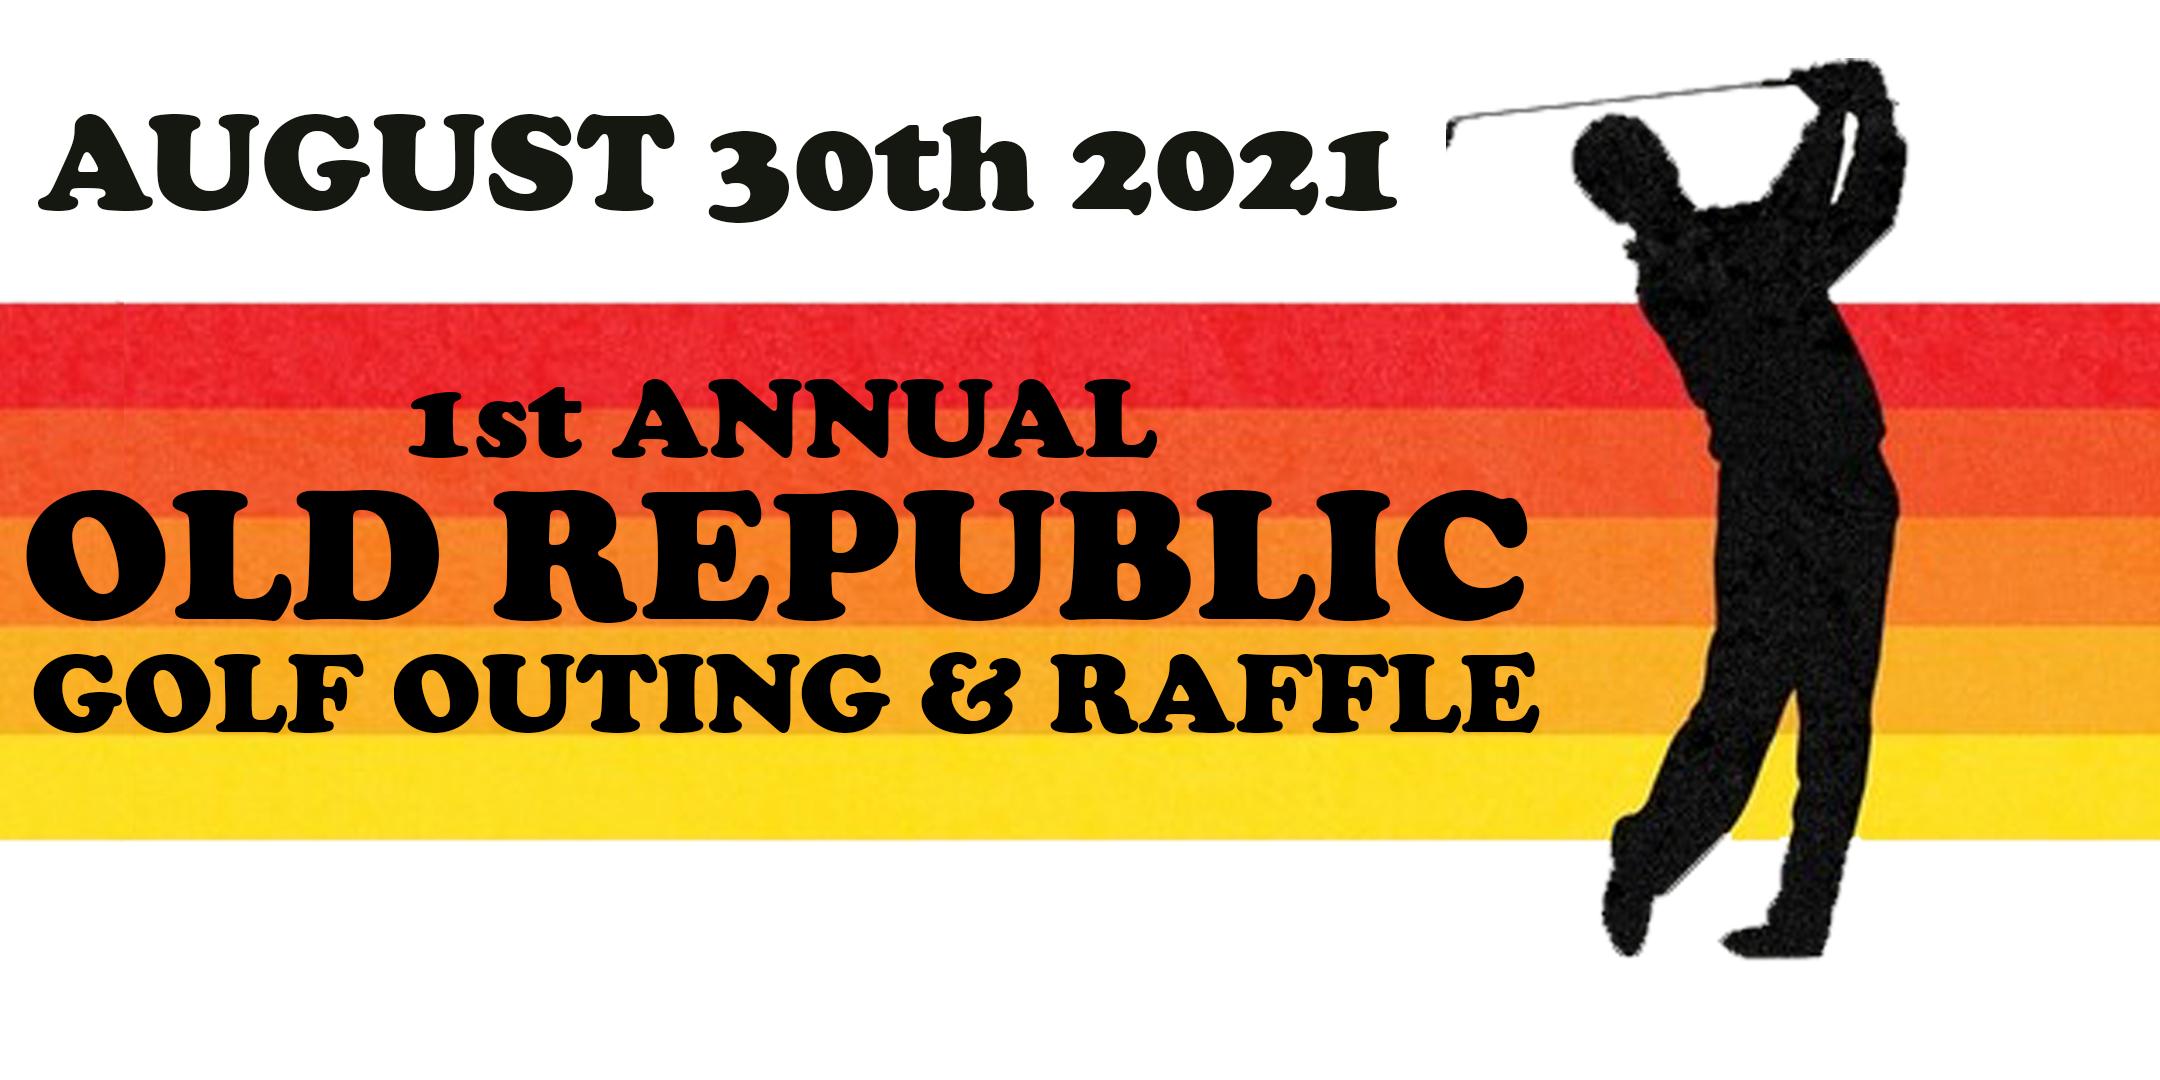 The First Annual OLD REPUBLIC Golf Outing & Raffle